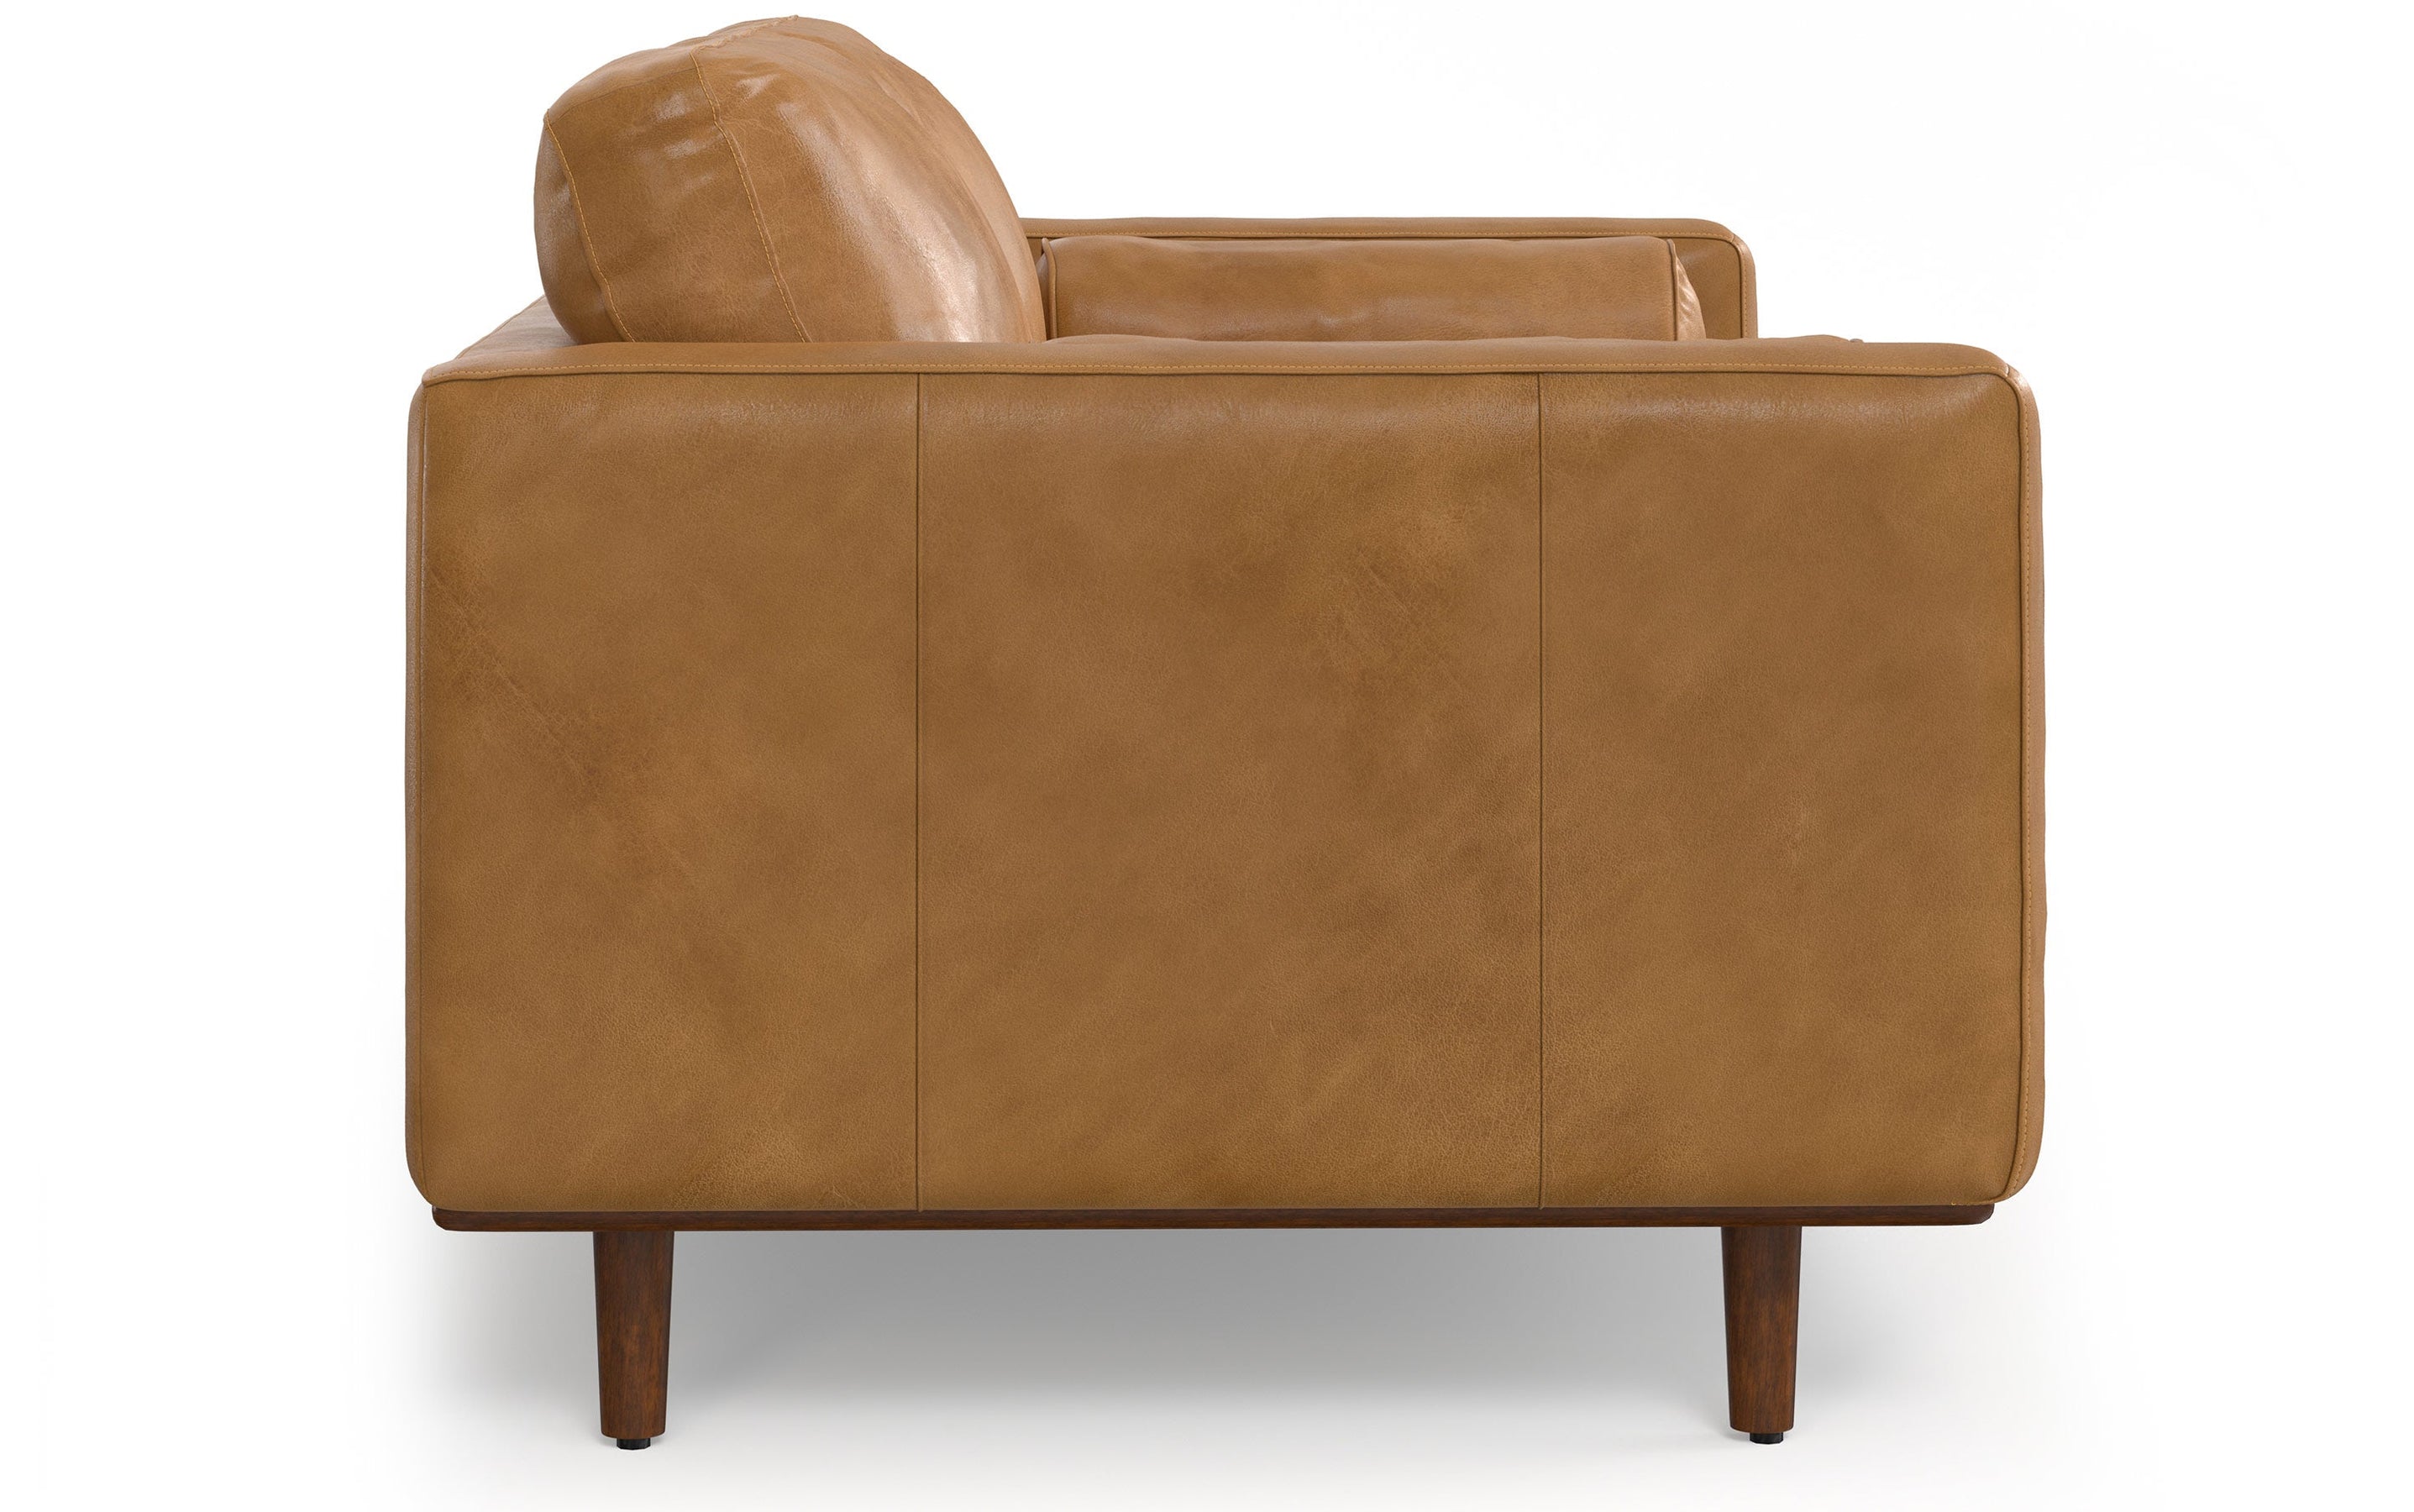 Sienna Genuine Top Grain Leather | Morrison 72-inch Sofa and Ottoman Set in Genuine Leather